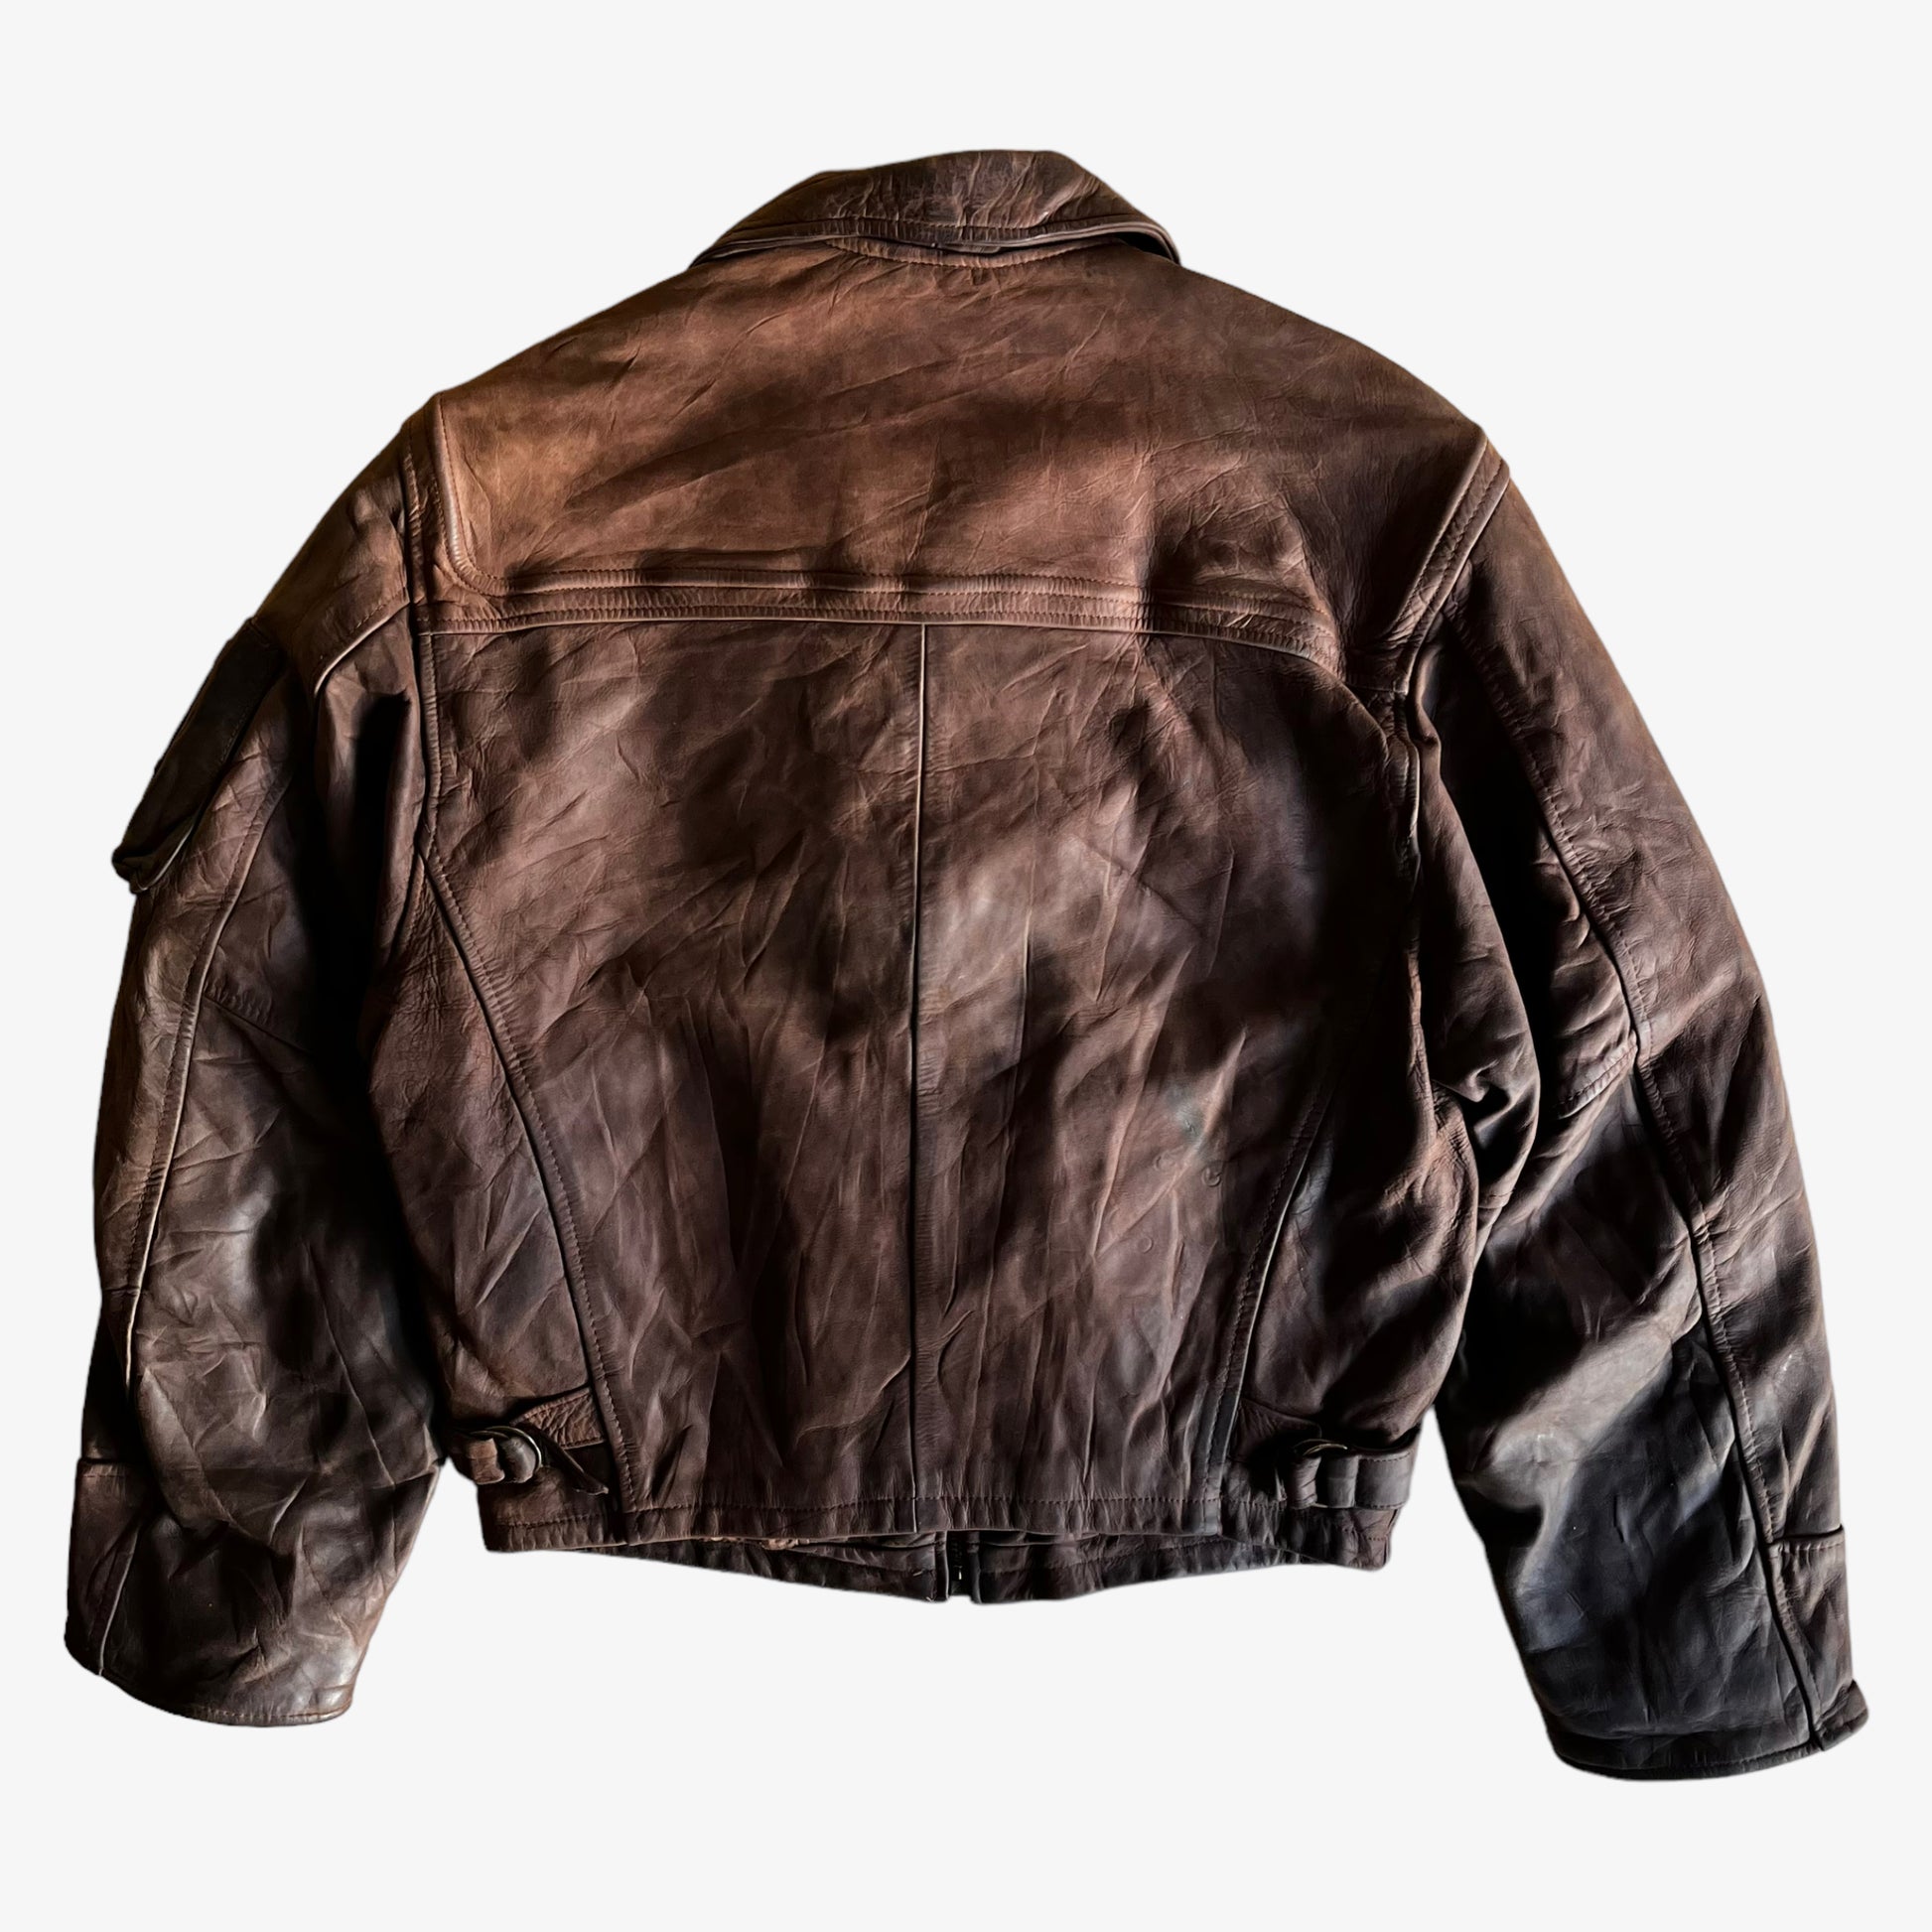 Vintage 90s Redskins Brown Leather Pilot Jacket With Fish Hook Fasteners Back - Casspios Dream